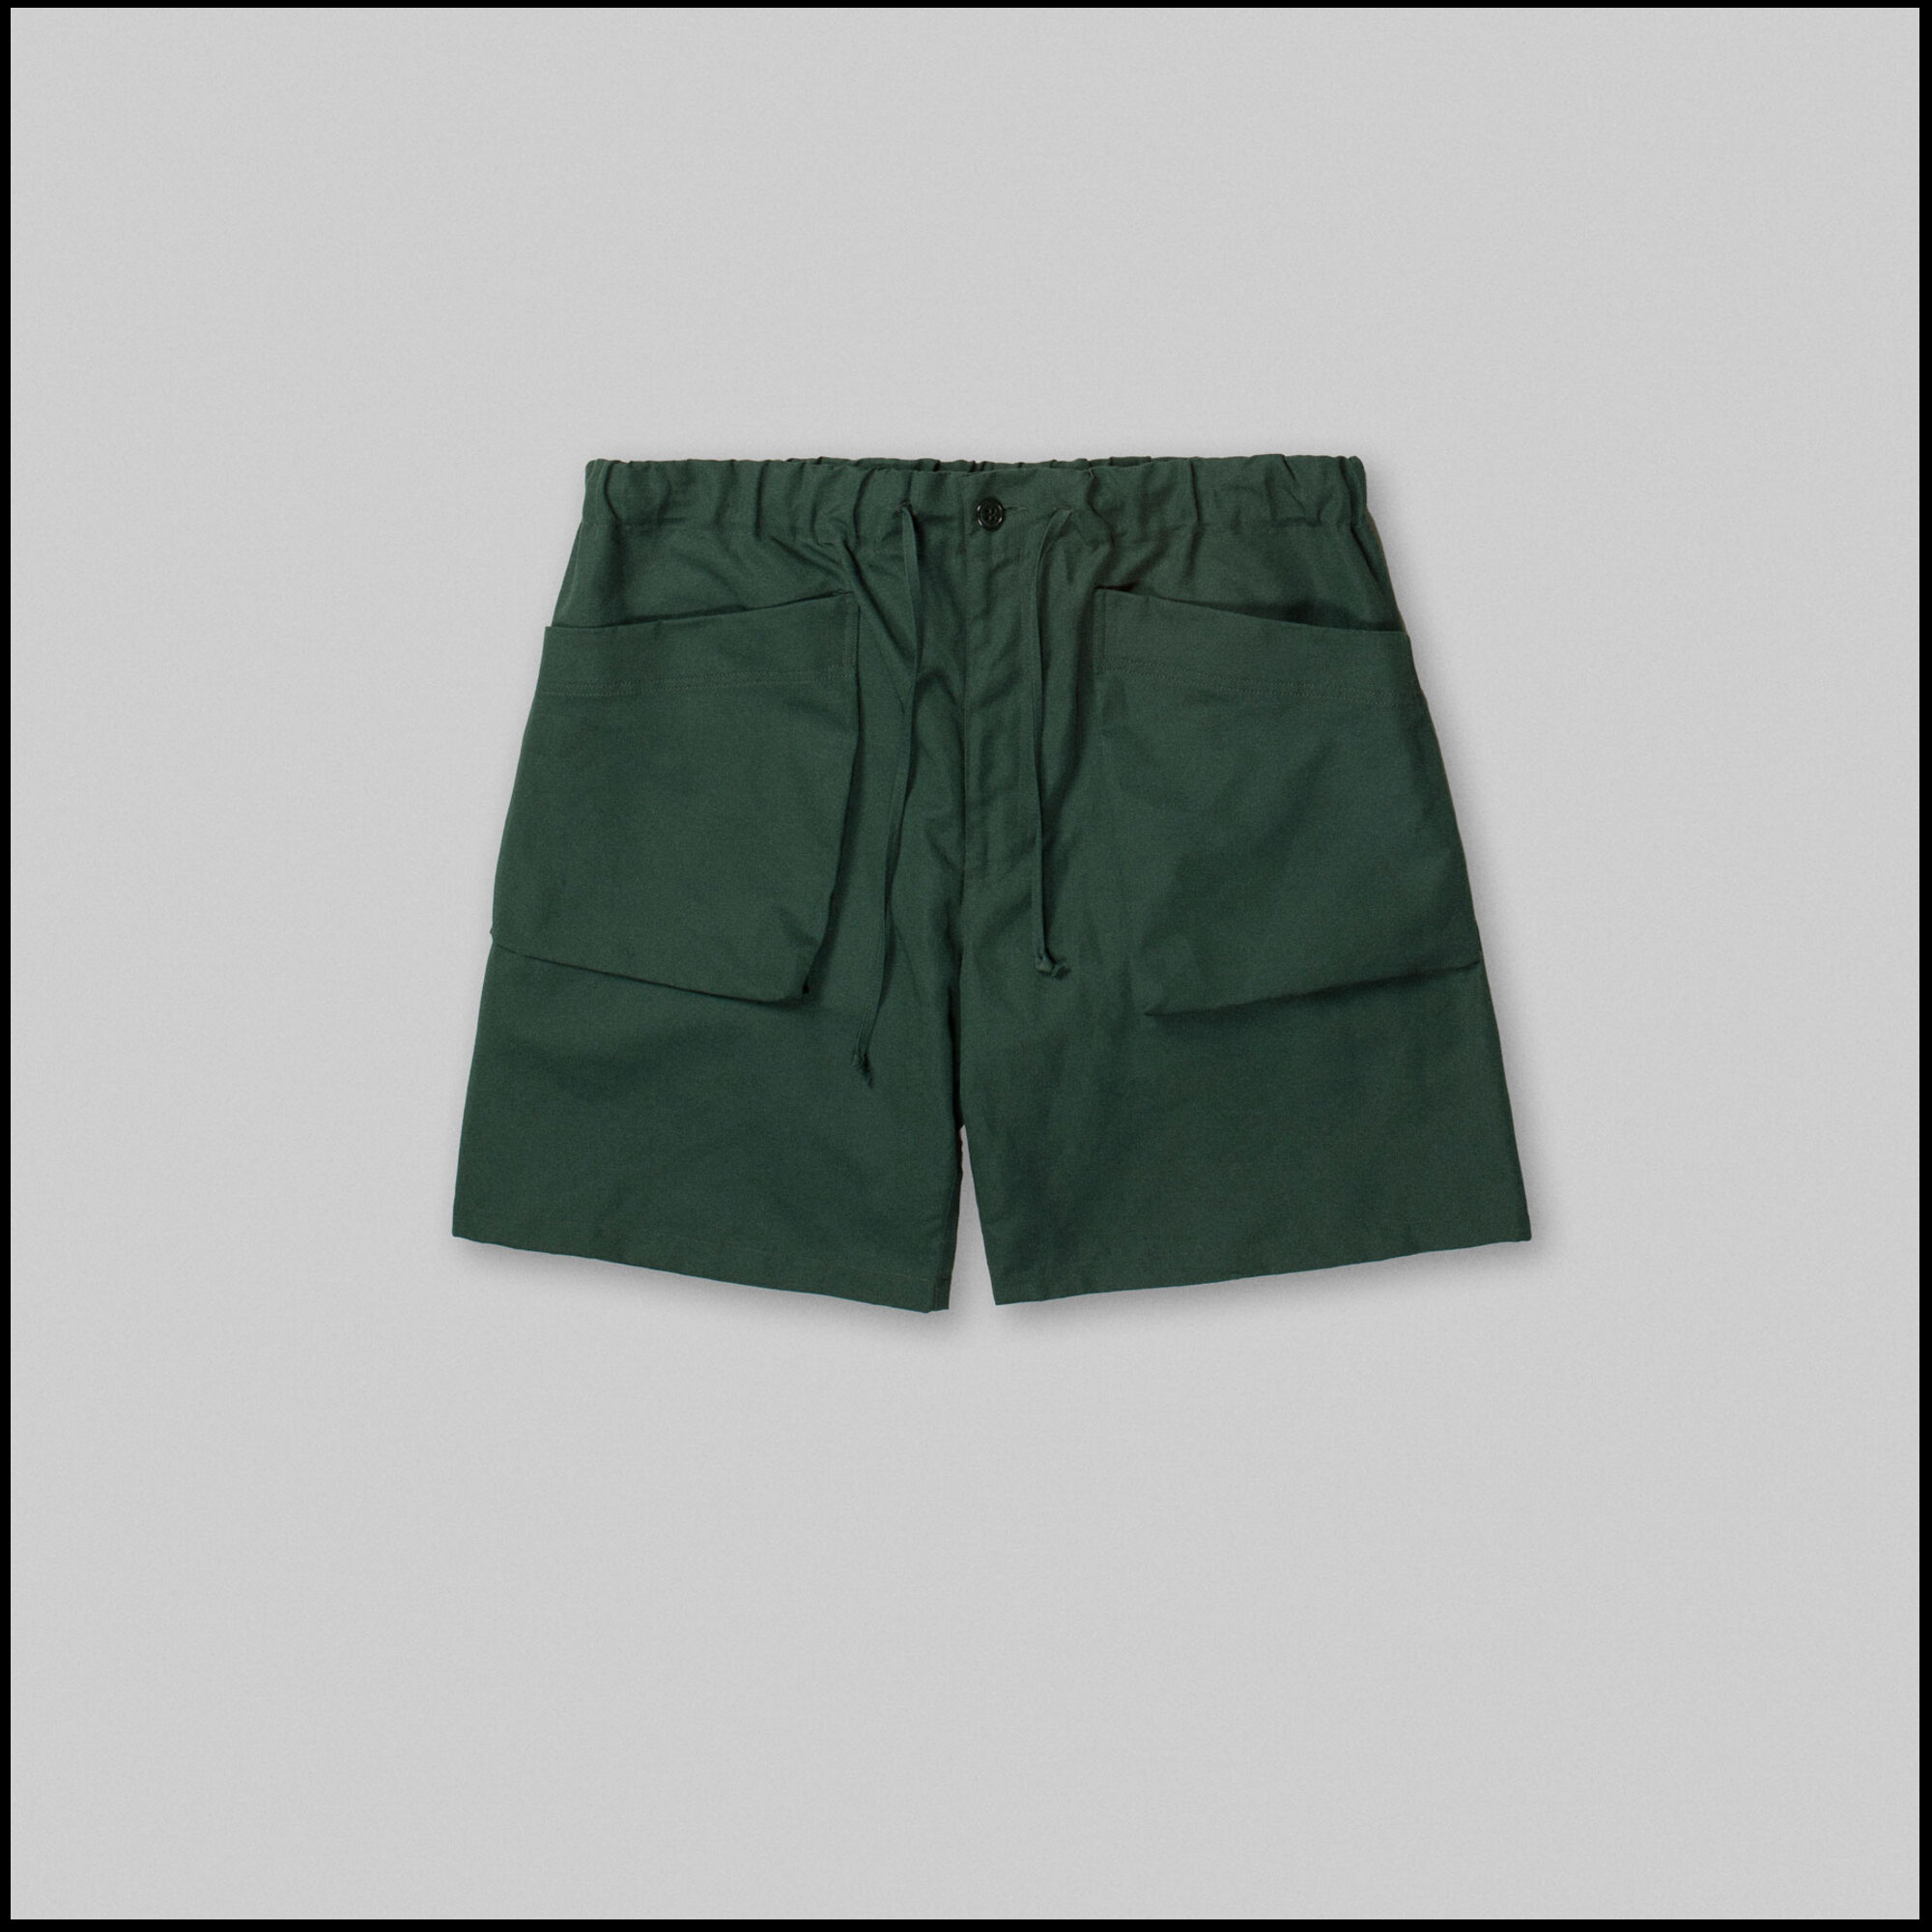 CARGO Shorts by Arpenteur in Green color